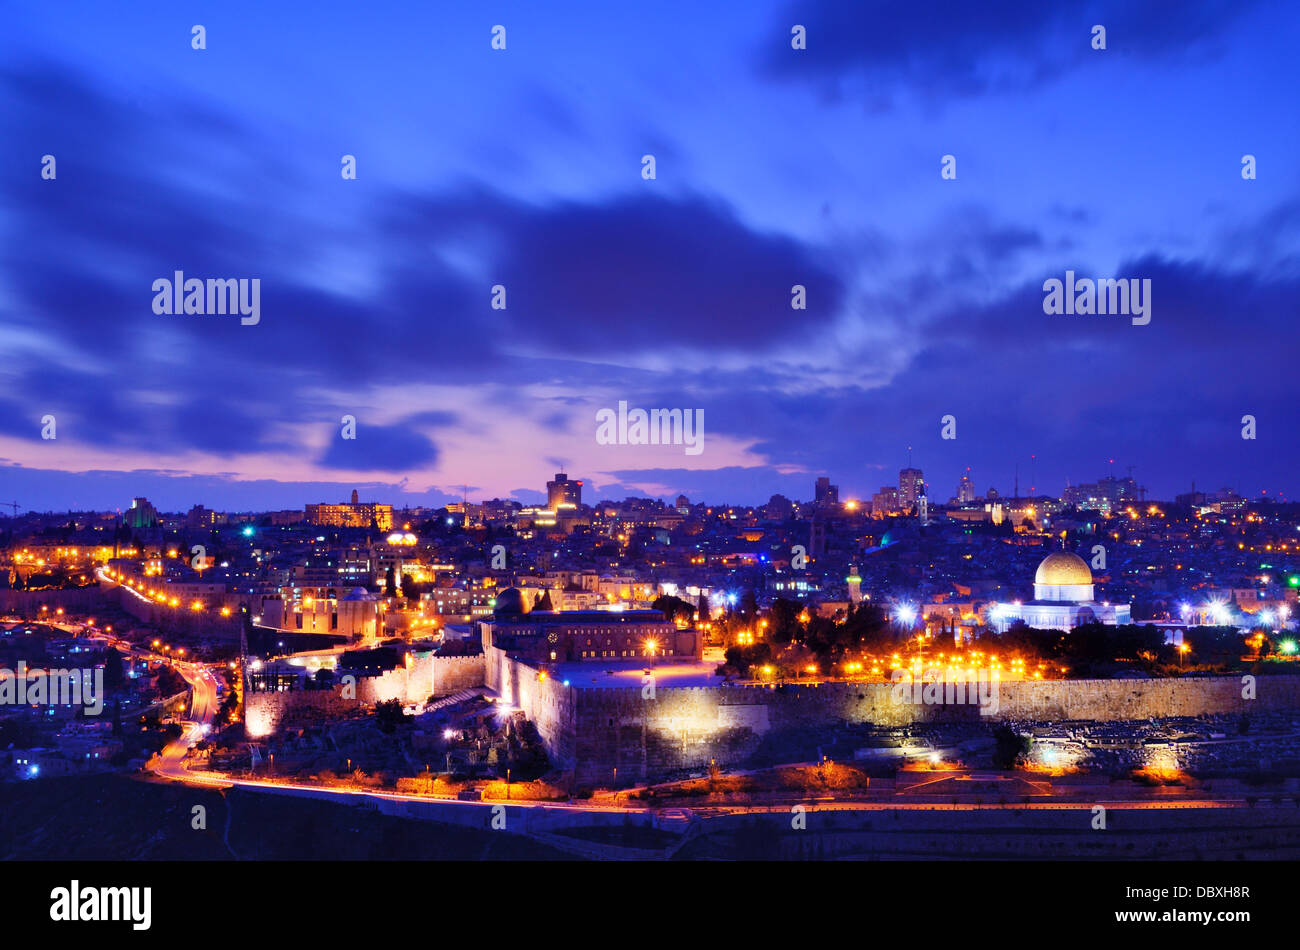 Skyline of the Old City and Temple Mount in Jerusalem, Israel. Stock Photo